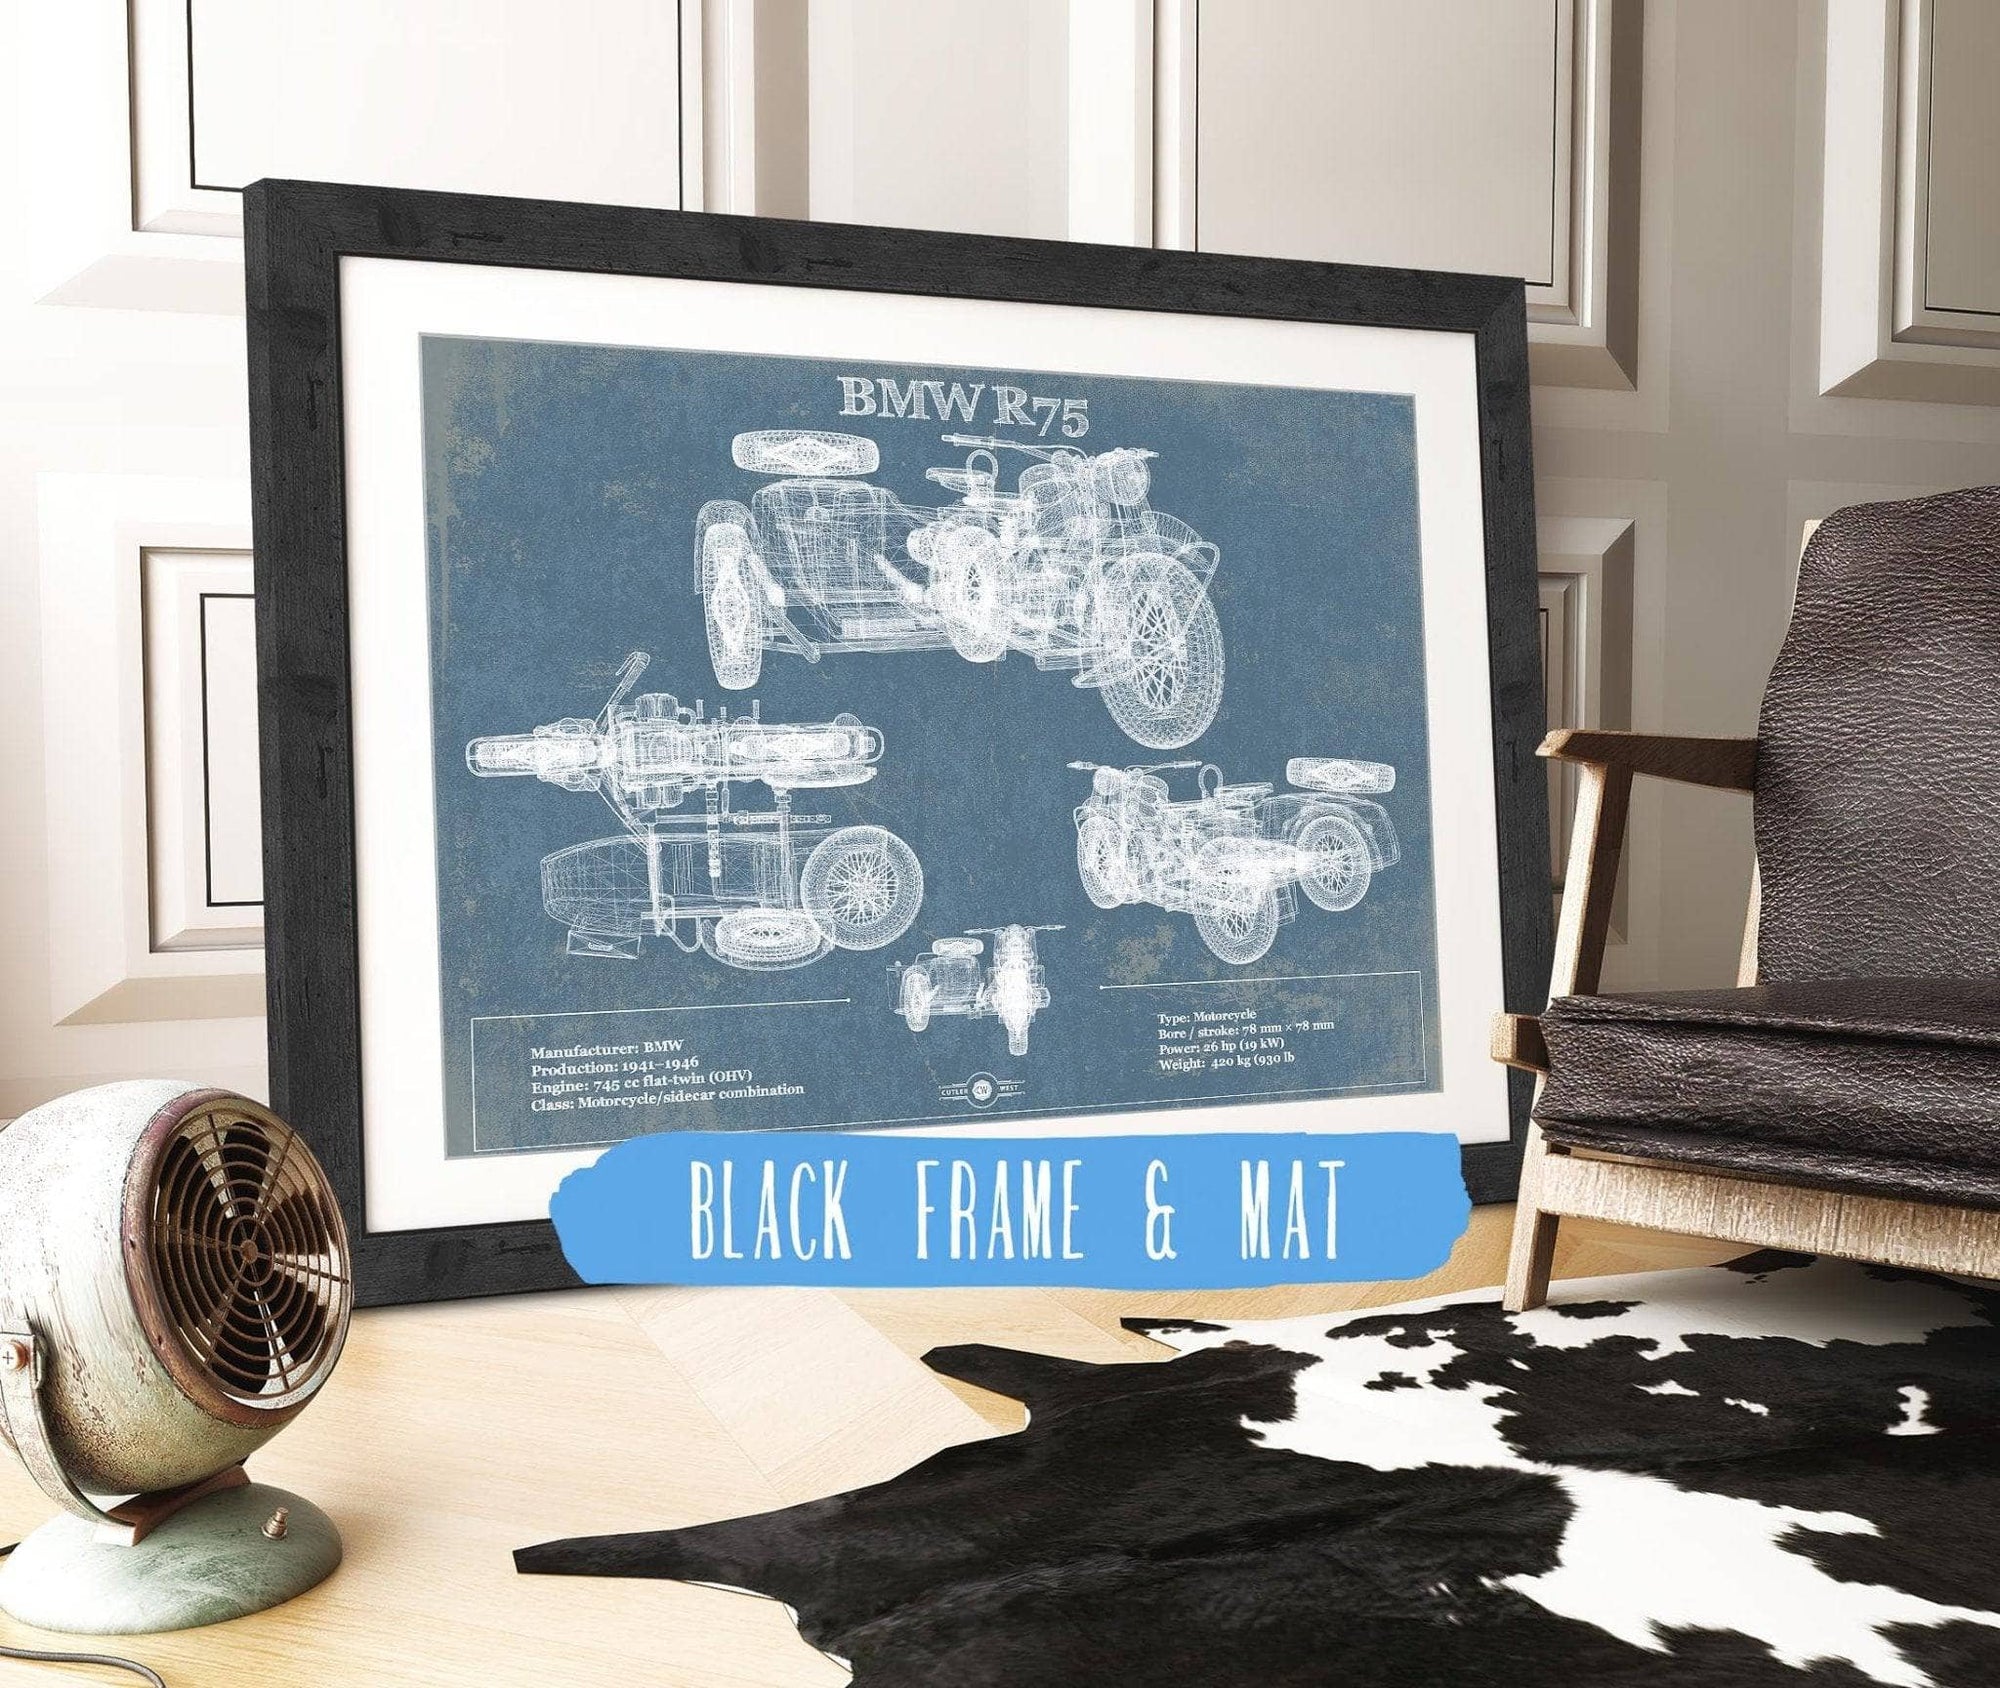 Cutler West Vehicle Collection 14" x 11" / Black Frame & Mat BMW R75 Blueprint Motorcycle Patent Print 833110058_47485